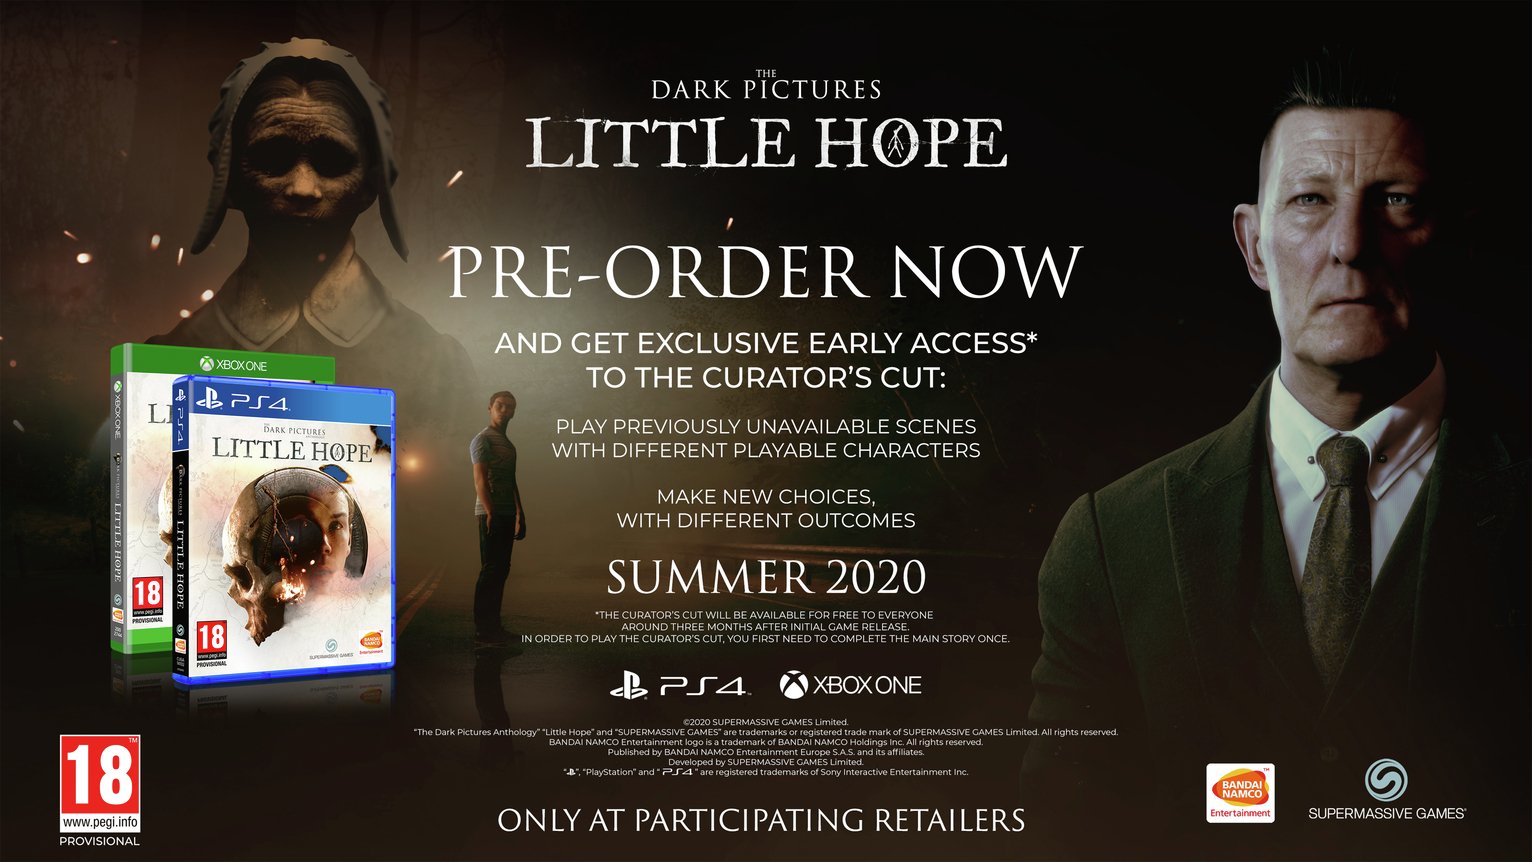 Dark Pictures: Little Hope PS4 Game Pre-Order Review